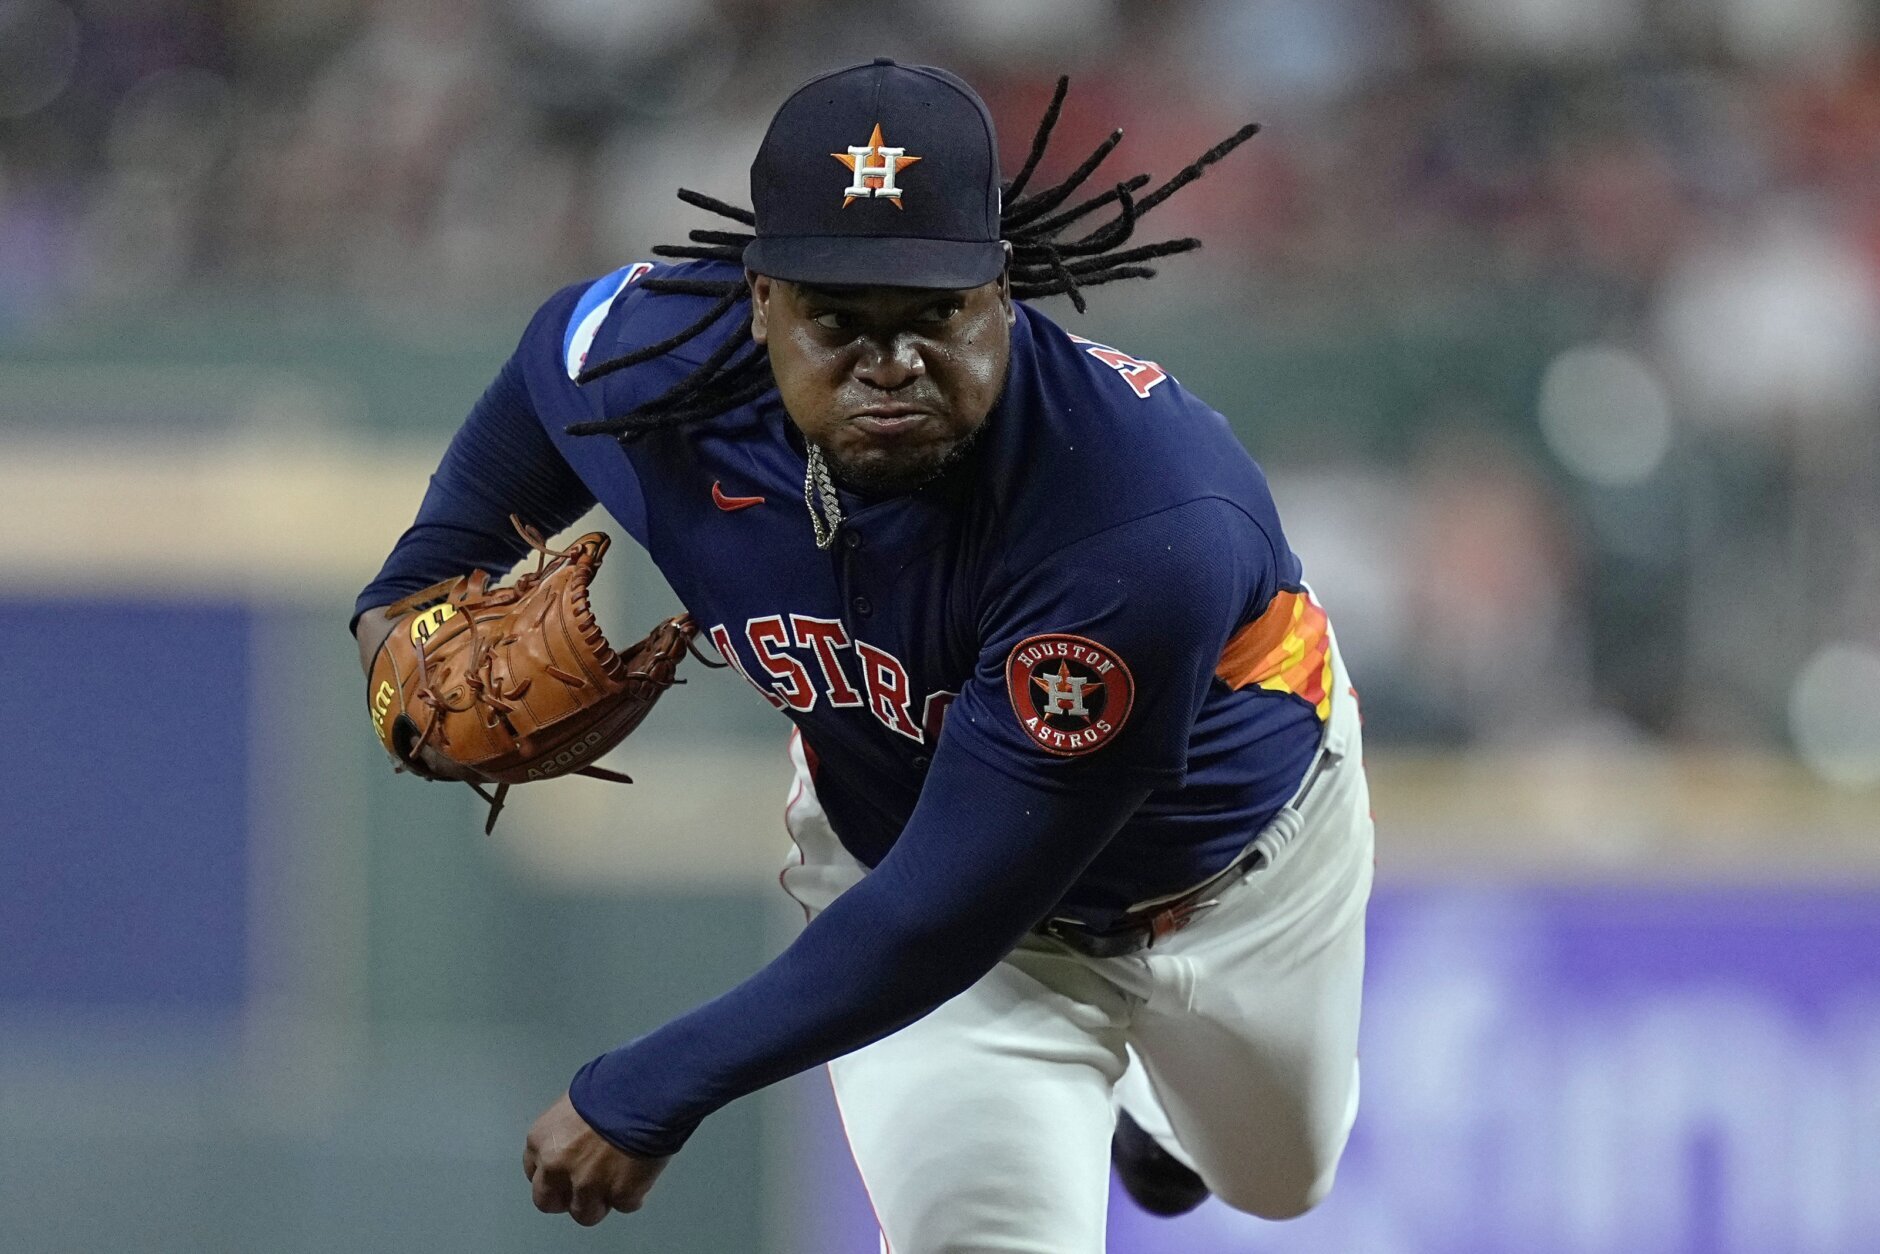 Astros Framber Valdez throws no-hitter vs Guardians on 93 pitches